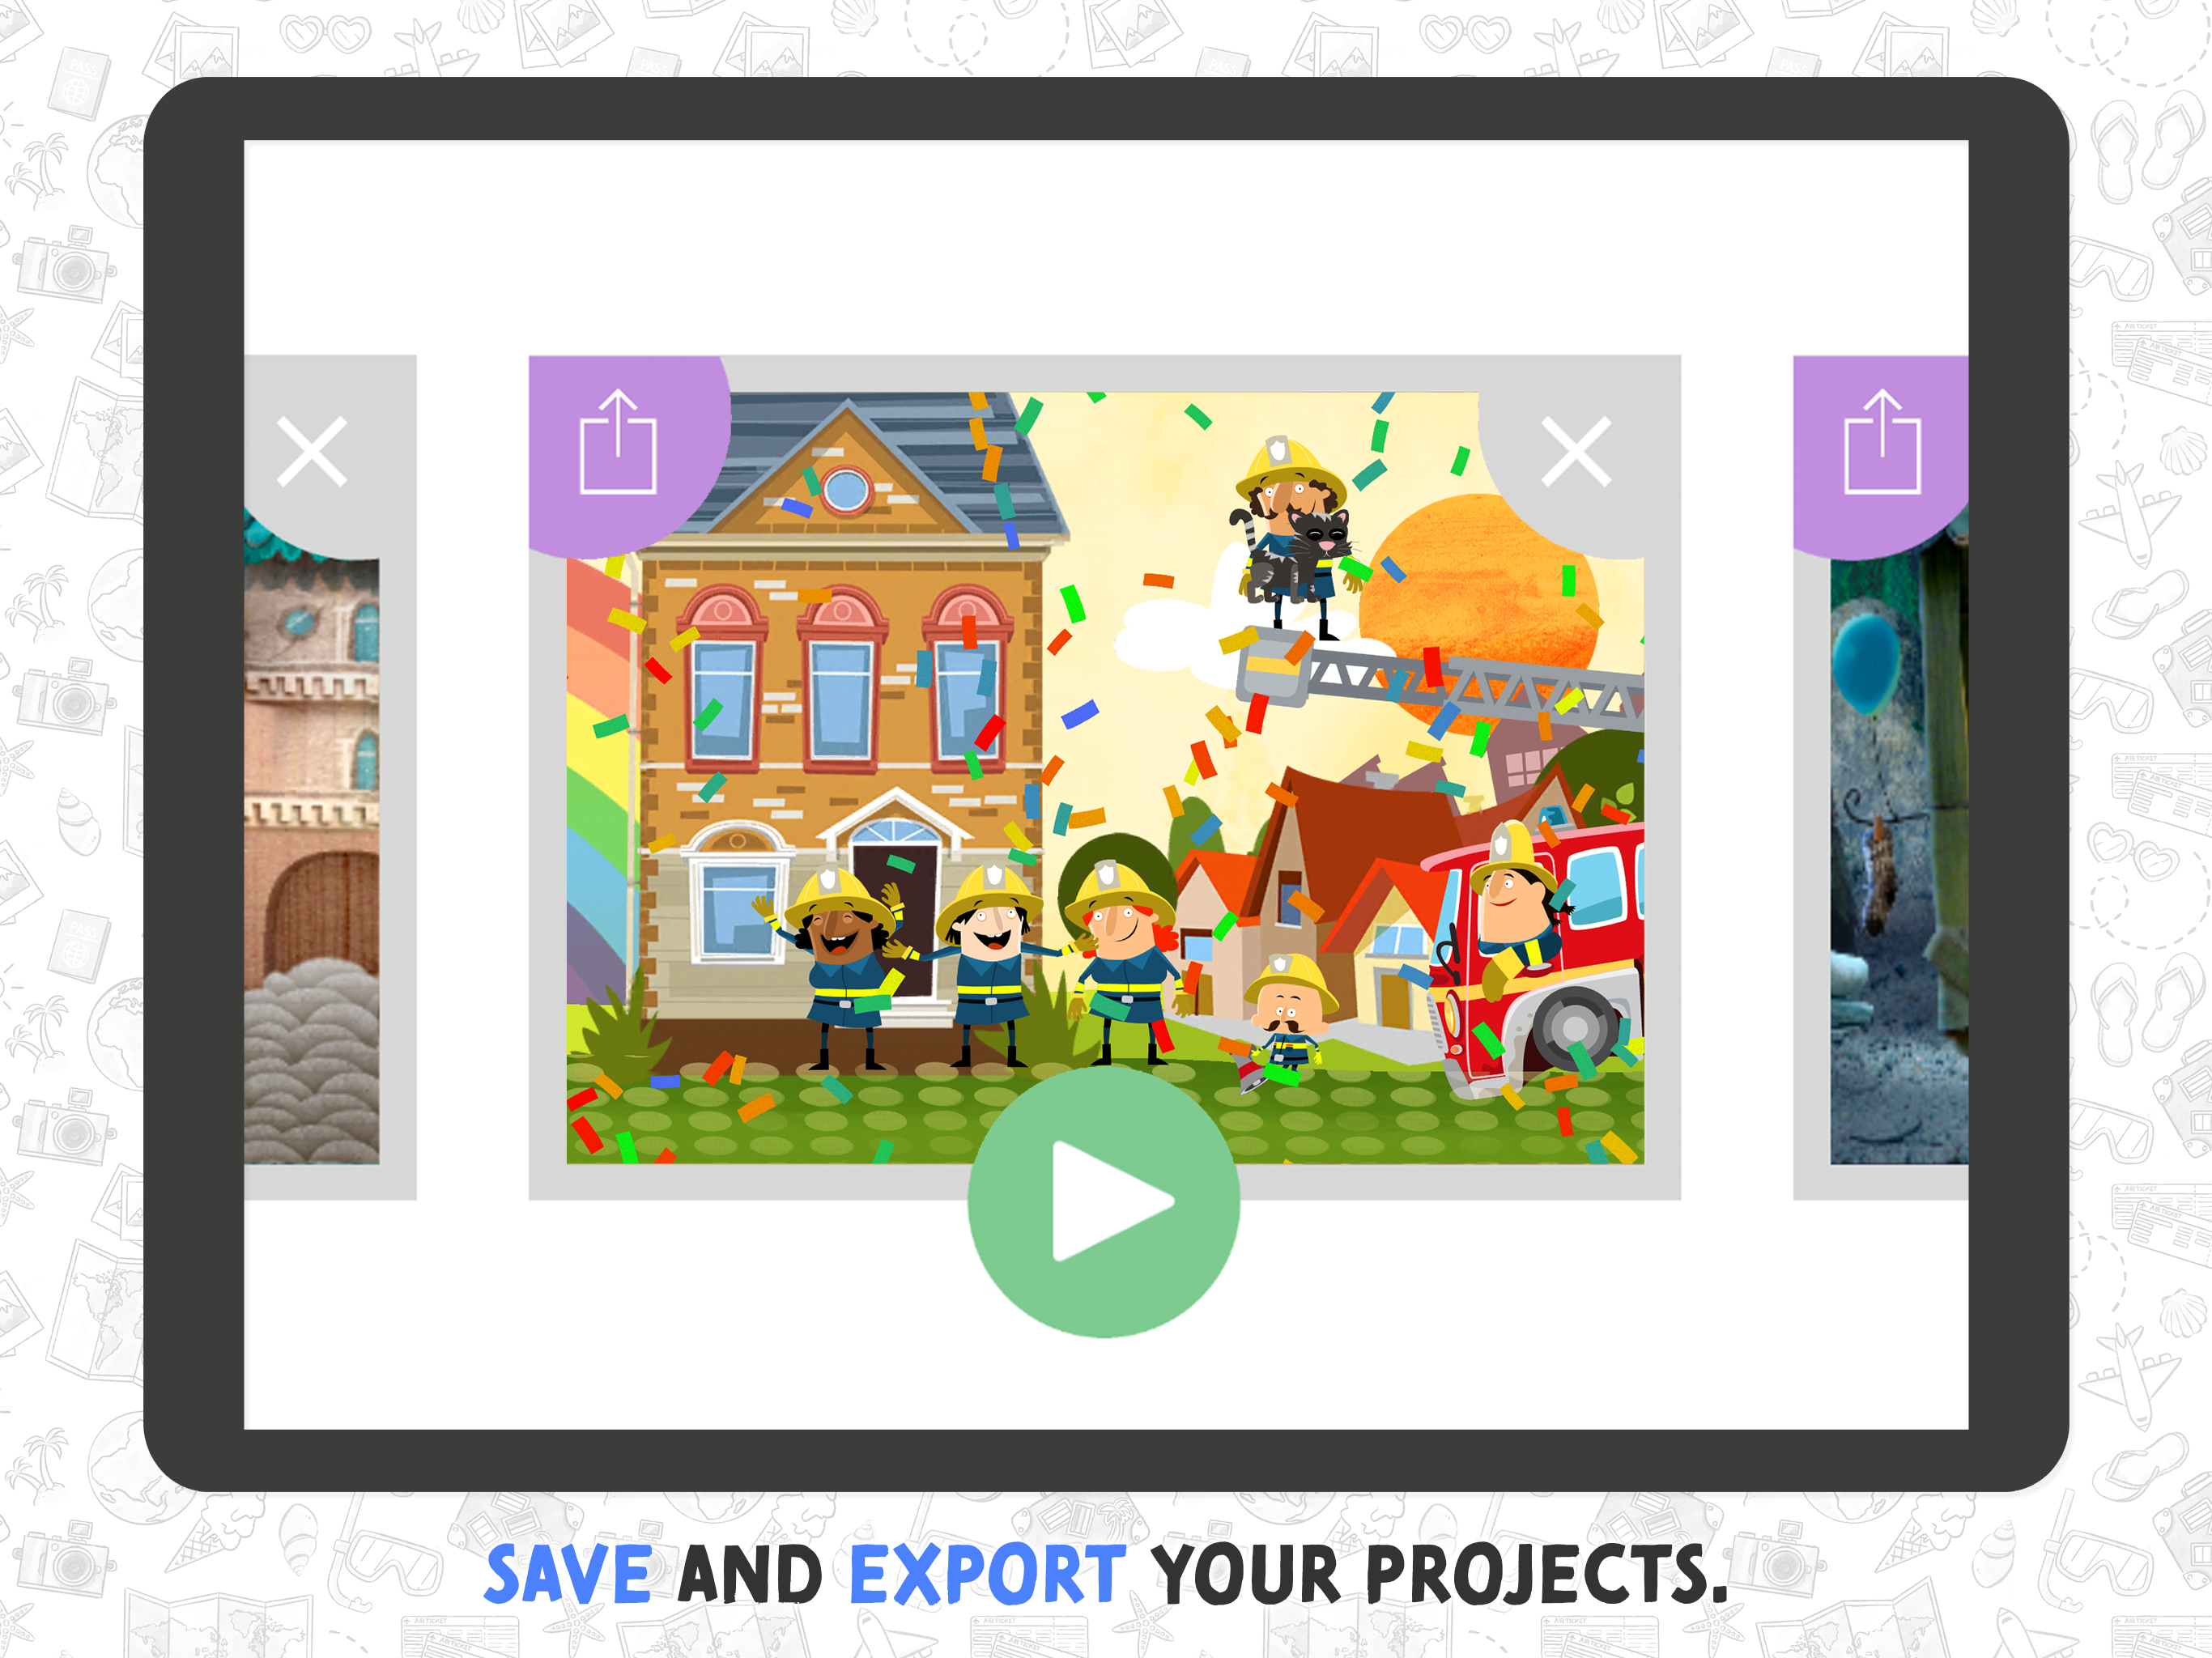 Movie Adventure – Save and export your projects